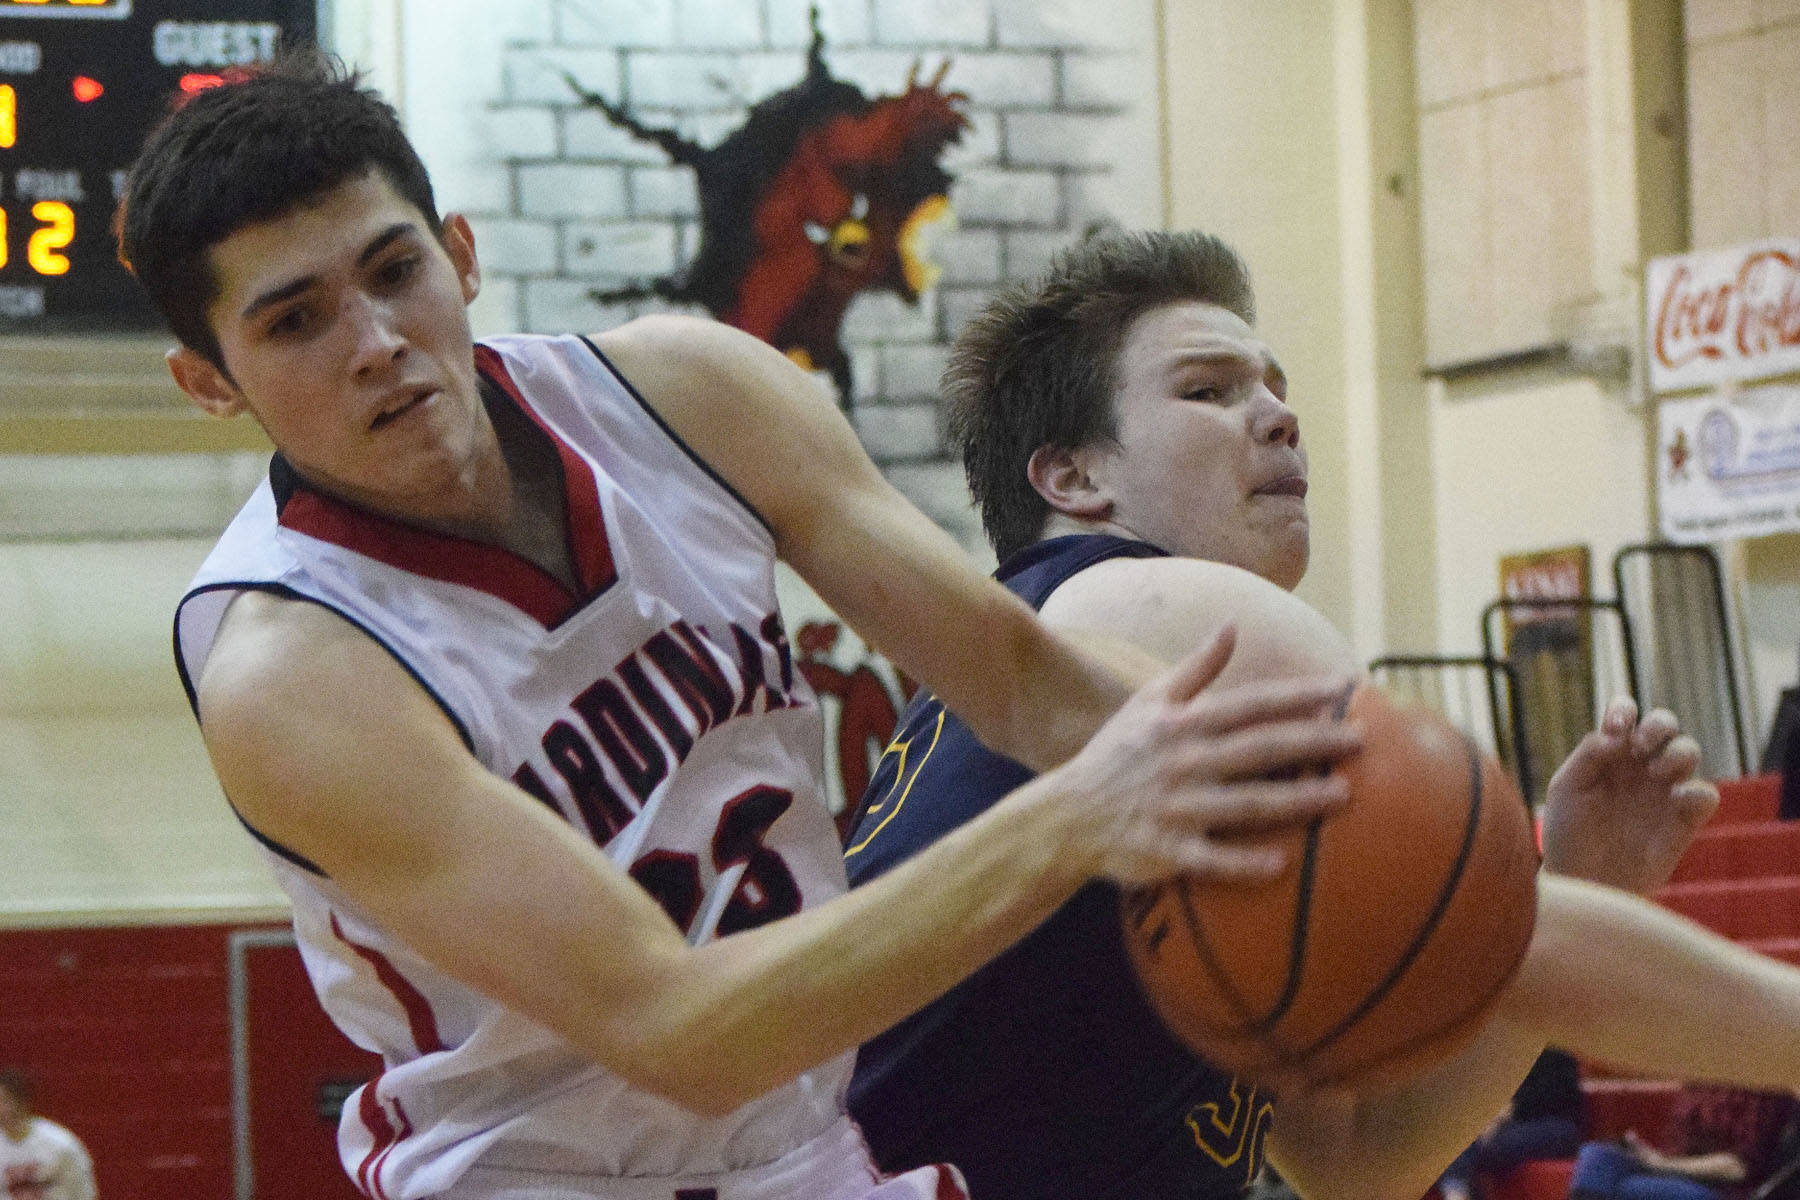 Southcentral hoops tourney ready to make noise in Seward